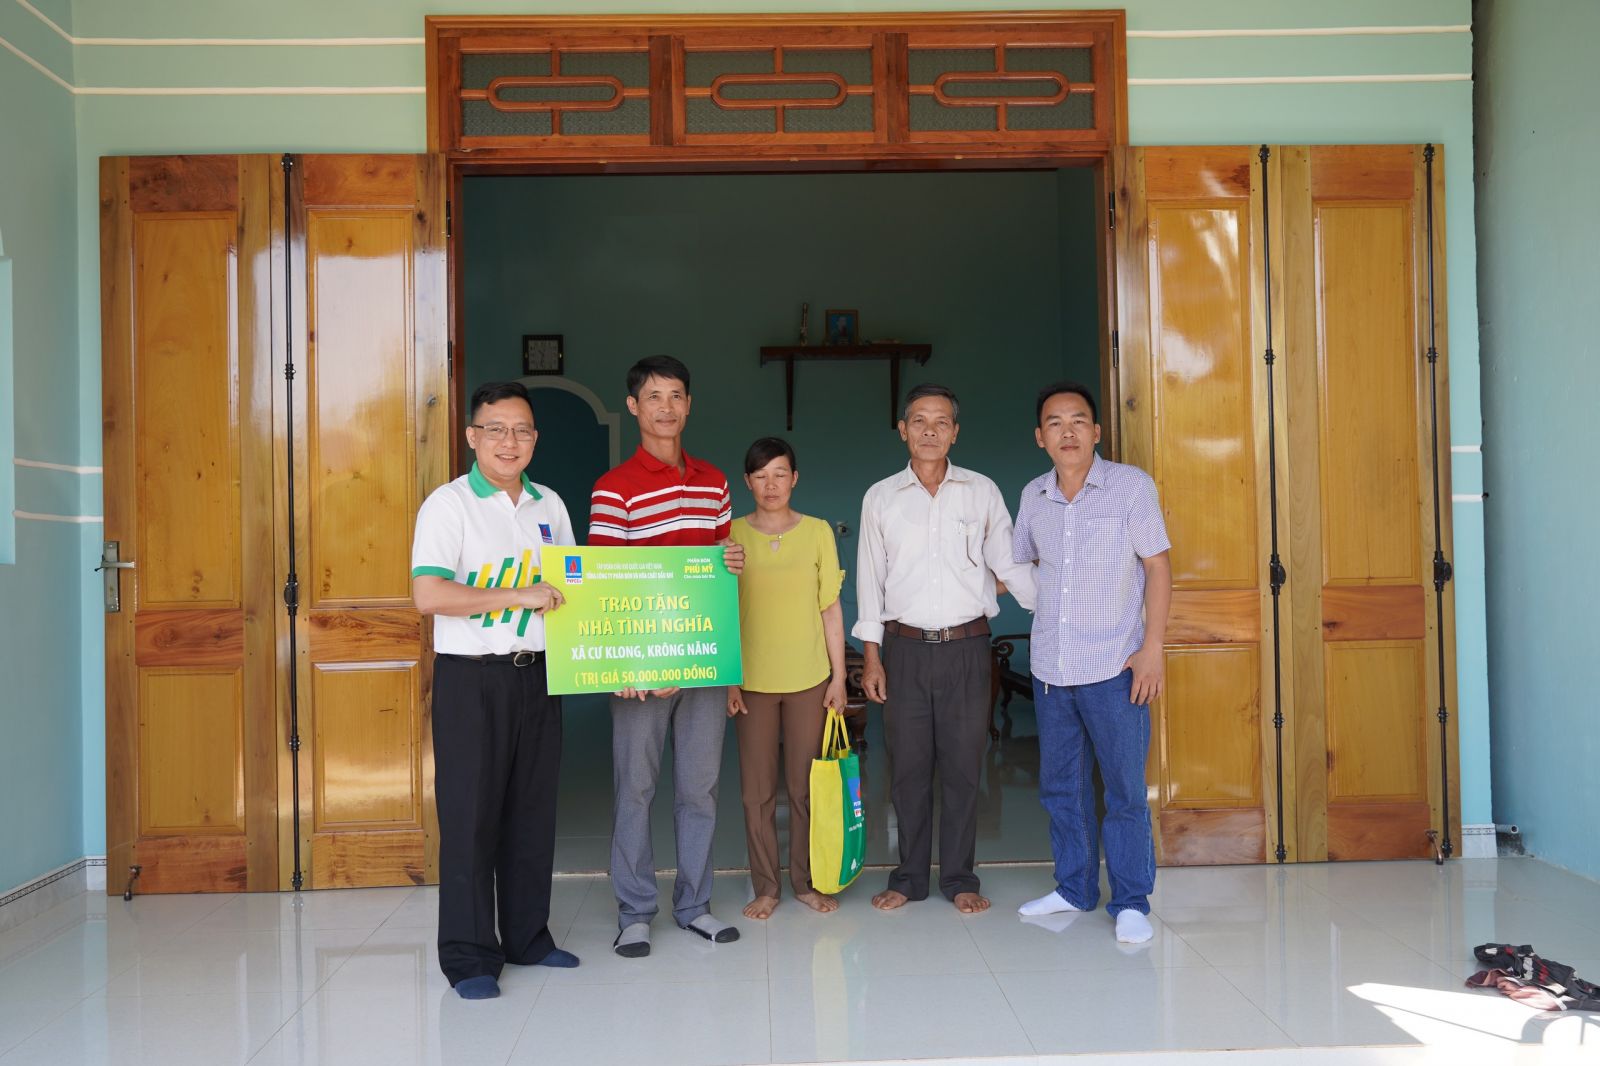 PVFCCo and its Distributor presented Great Unity houses in Dak Lak province